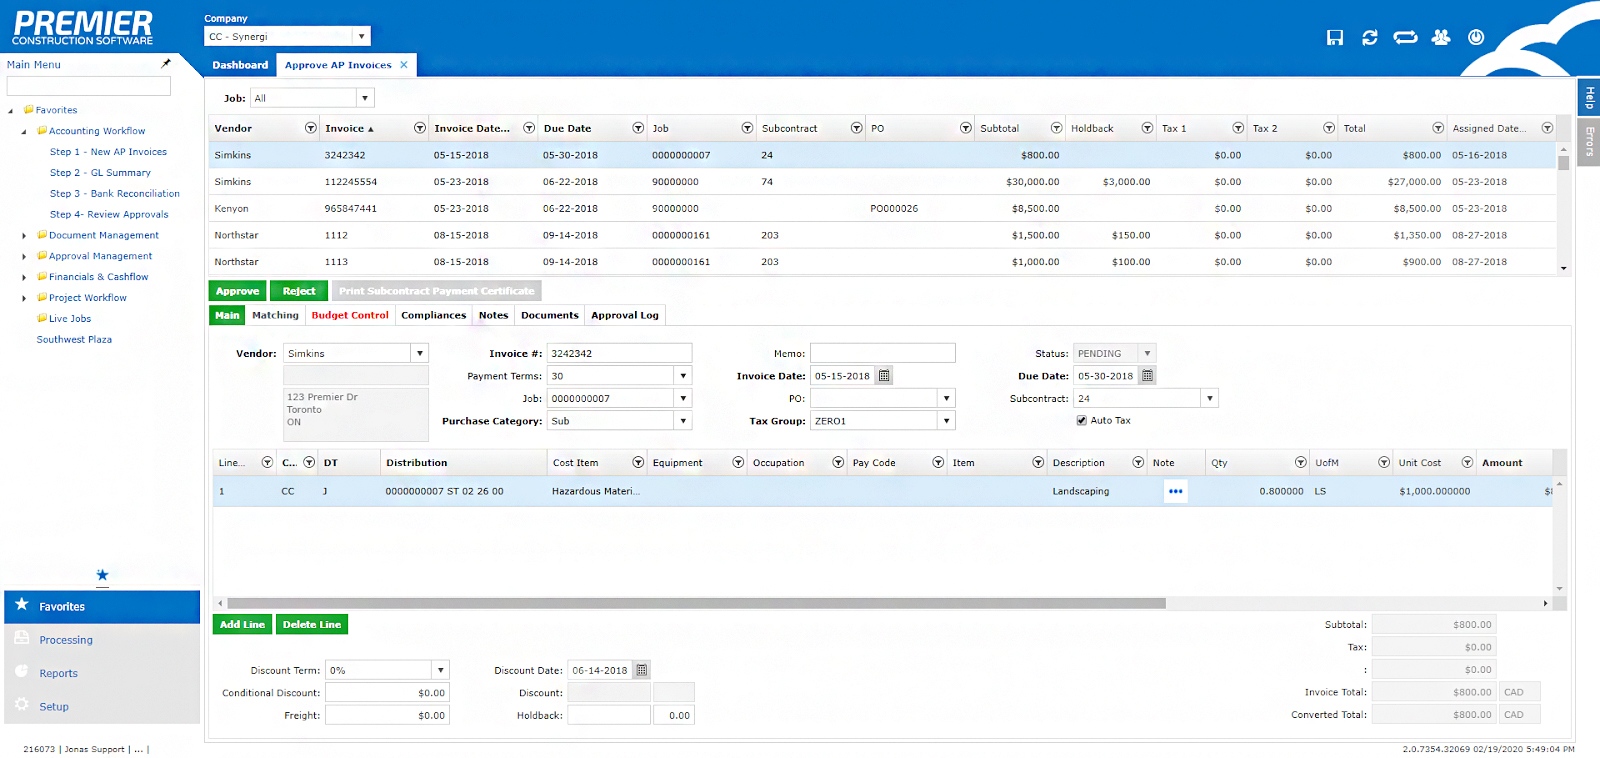 Accounts payable module in Premier showing different functions, such as invoice approval workflows.